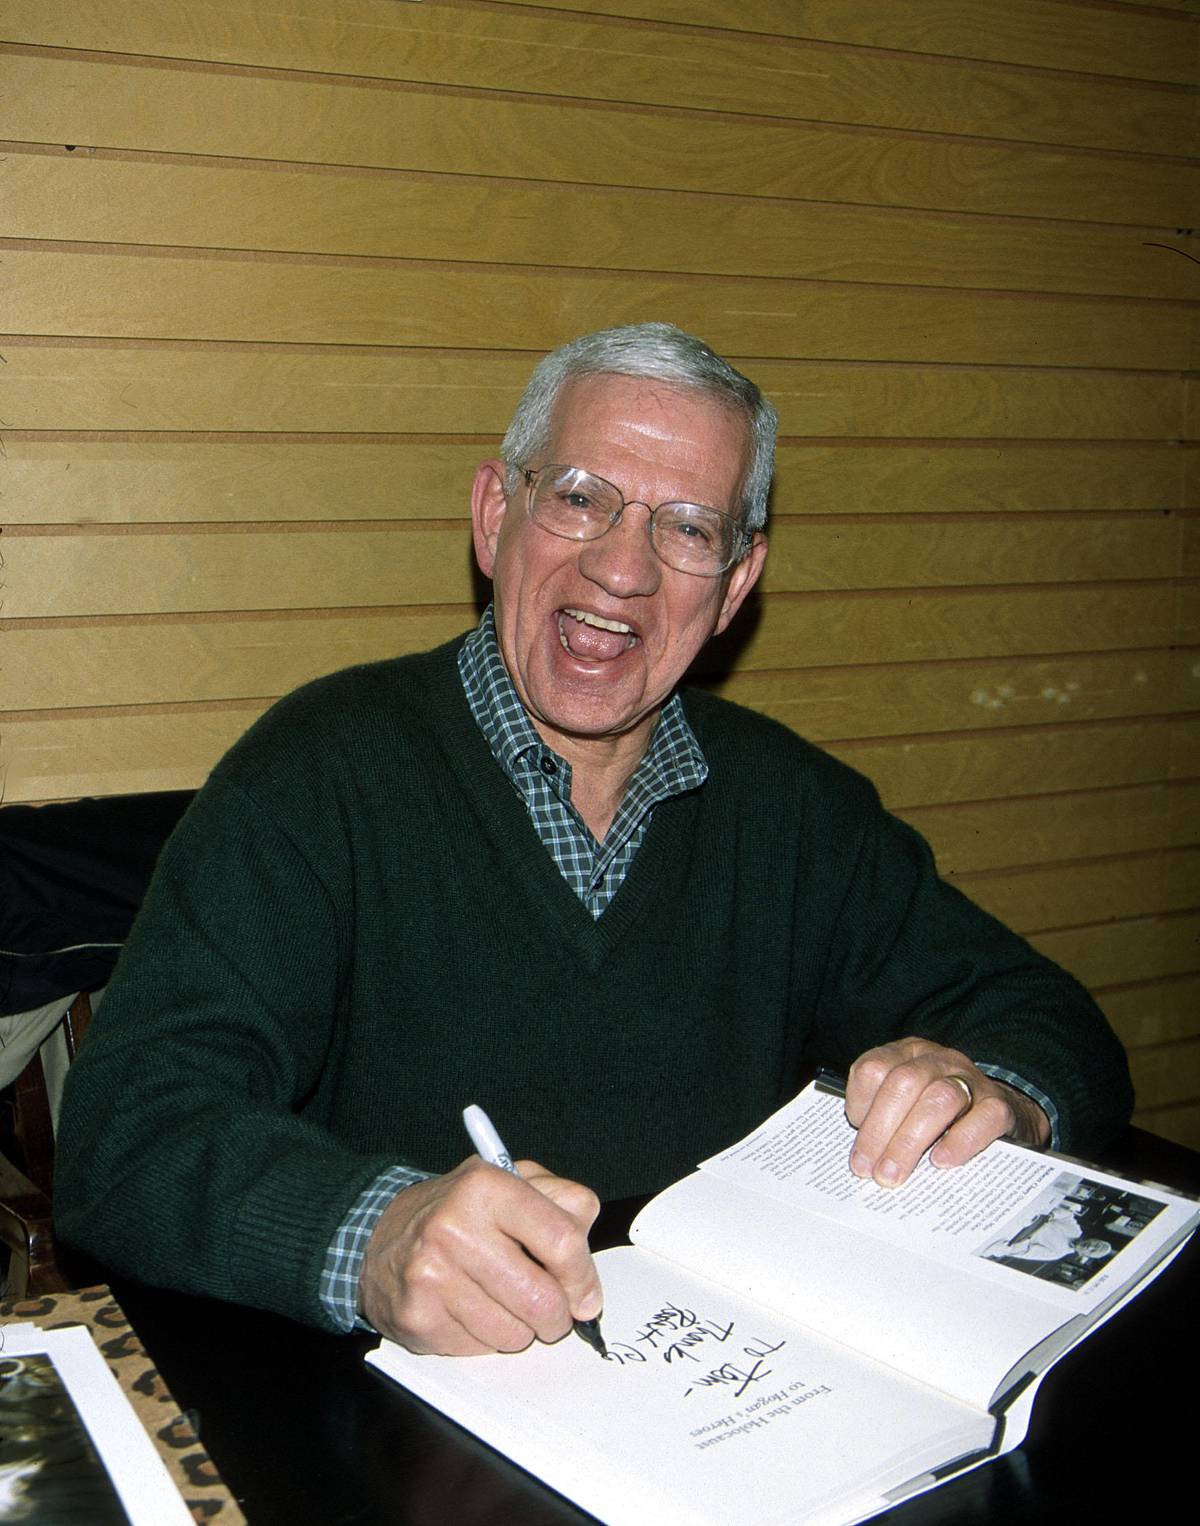 Robert Clary signs a copy of his book 'From the Holocaust to Hogan's Heroes,' at Barnes & Noble, Los Angeles, 2002